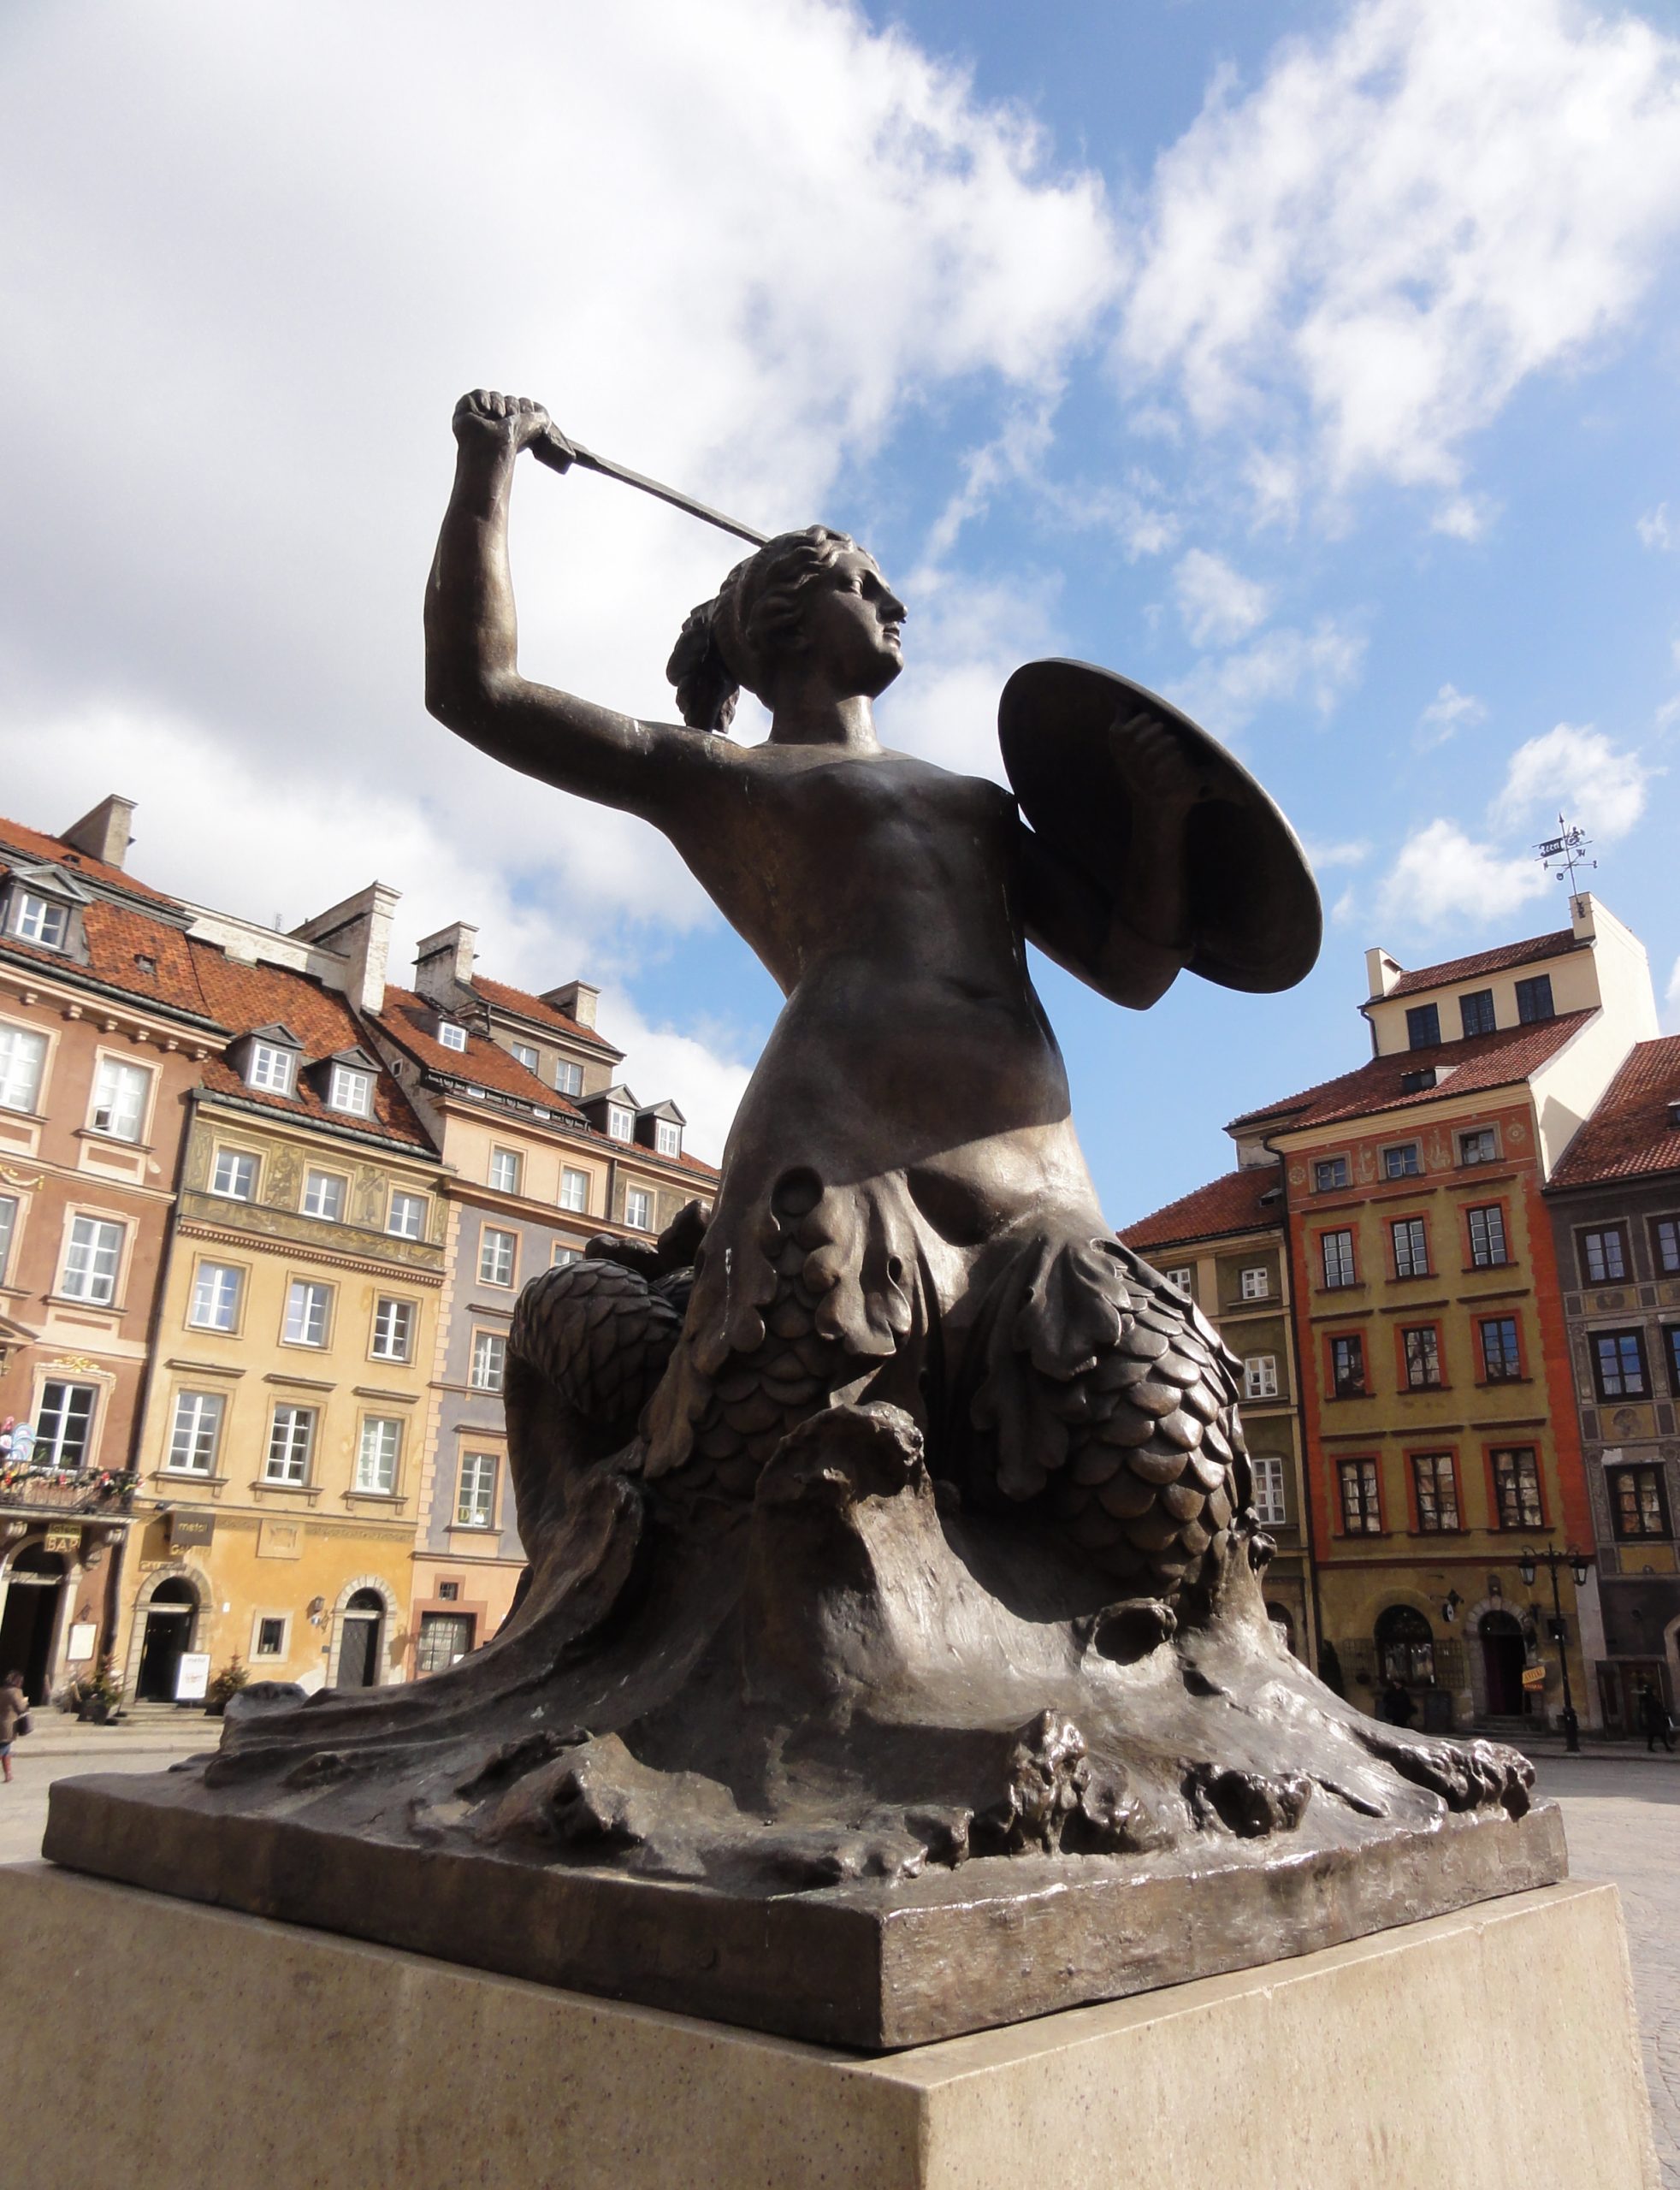 Statue of the Mermaid Warsaw